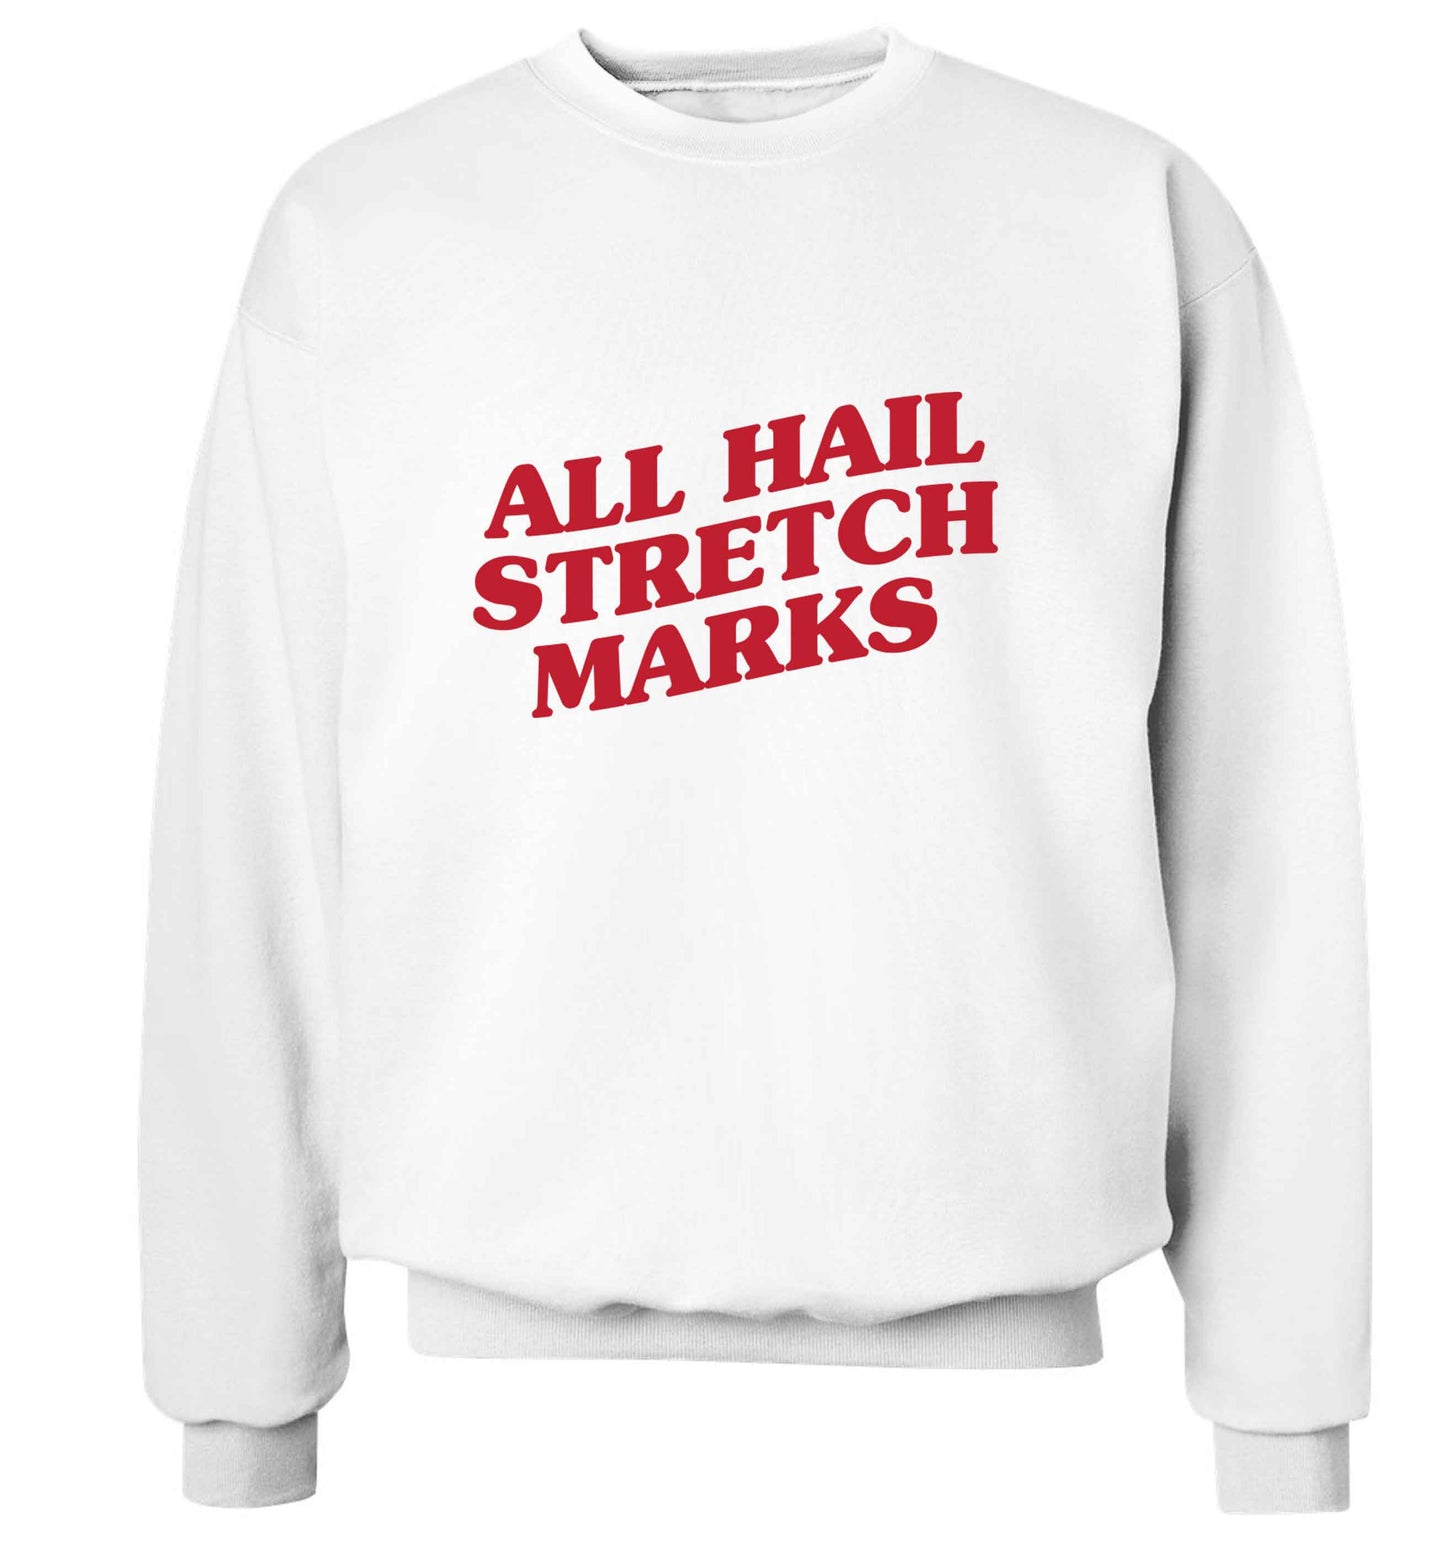 All hail stretch marks adult's unisex white sweater 2XL